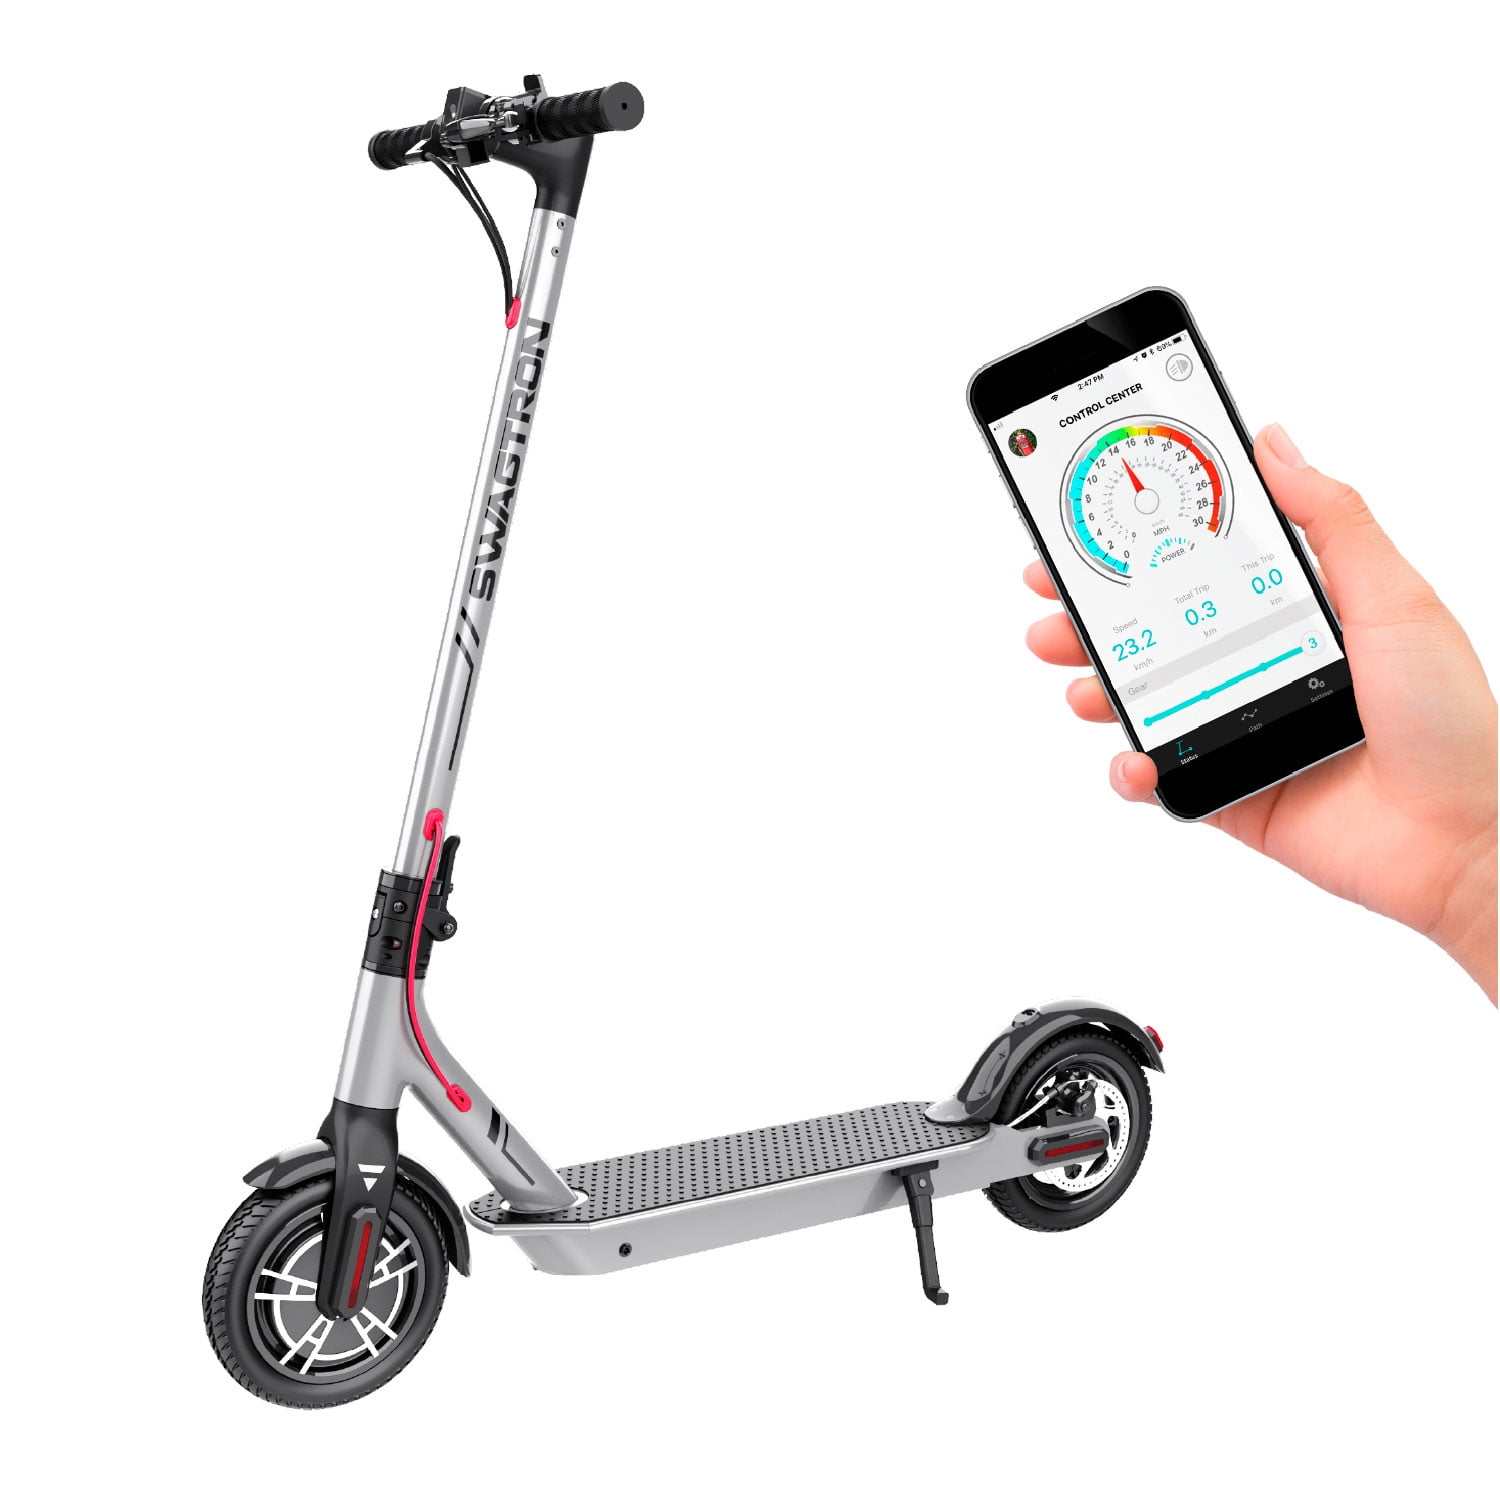 Swagtron Adult Scooter Swagger 5 Boost , 320 Lb Weight limit, 8.5 Inch No-flat Tires, 300W Motor, Folding, 18 Mph, Enhanced Long Range - Walmart.com